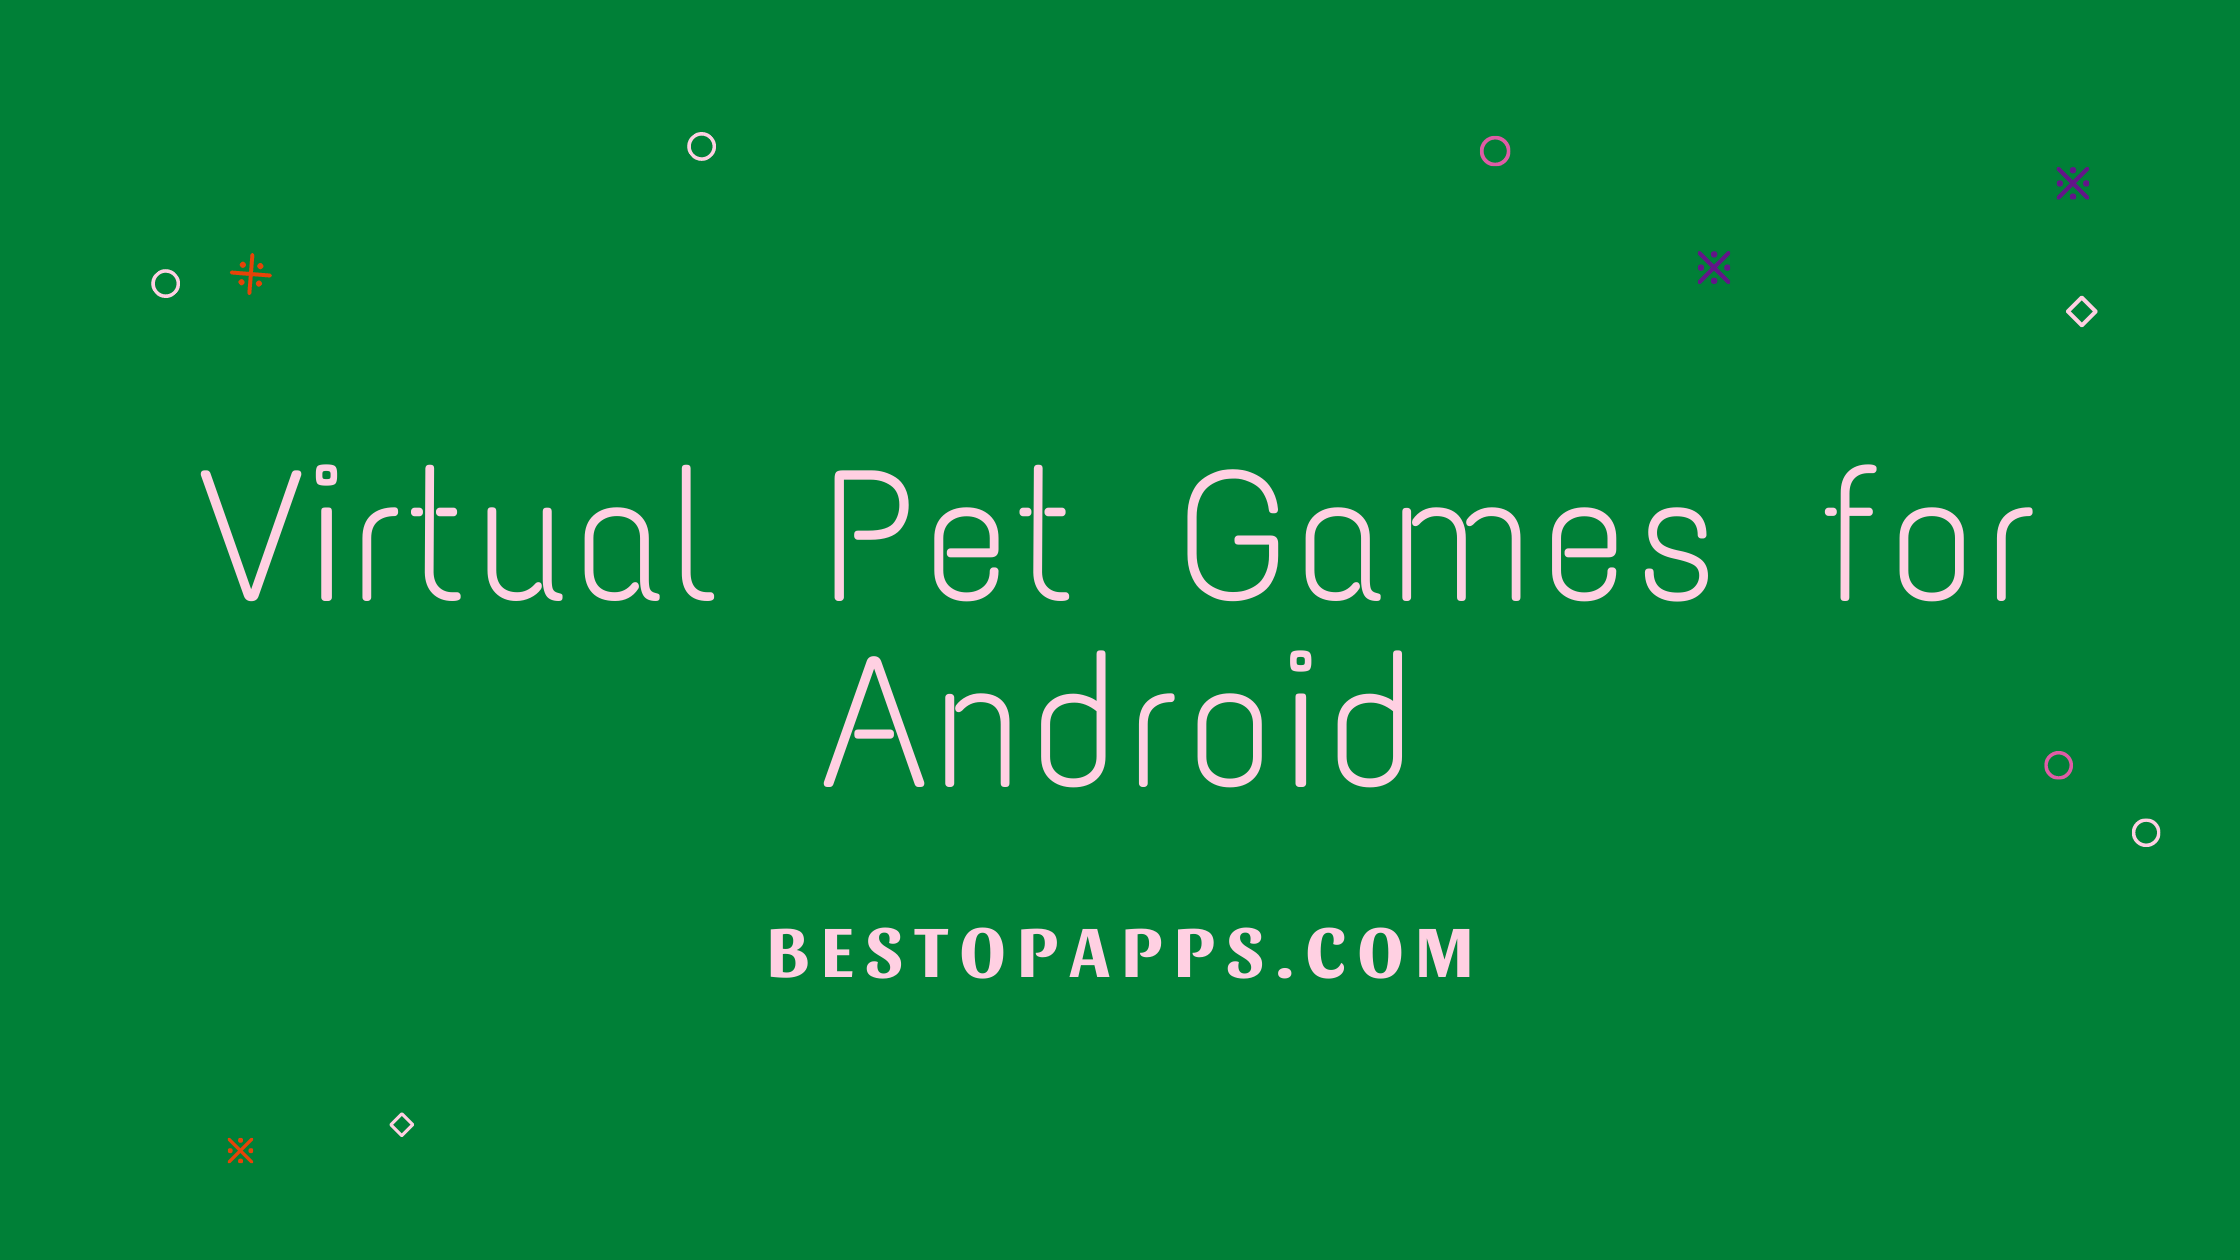 Virtual Pet Games for Android